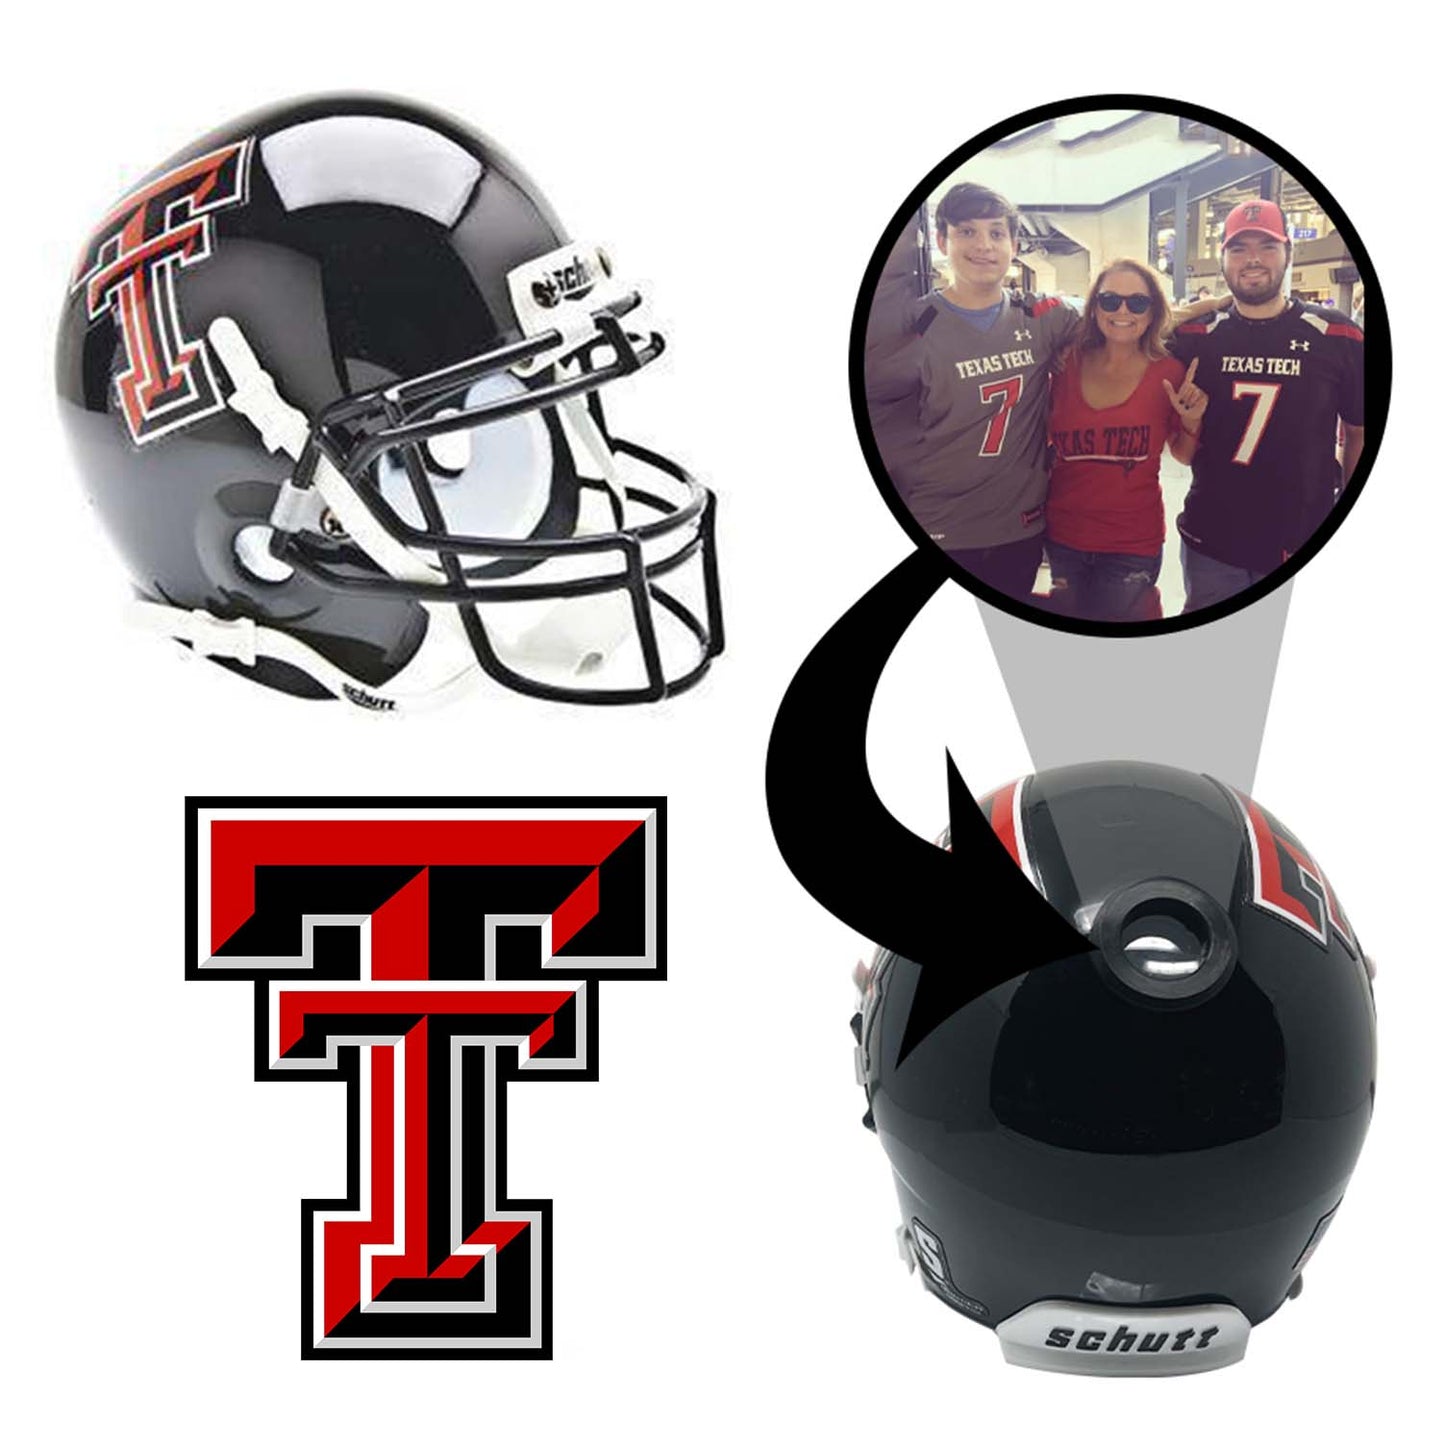 Texas Tech Red Raiders College Football Collectible Schutt Mini Helmet - Picture Inside - FANZ Collectibles